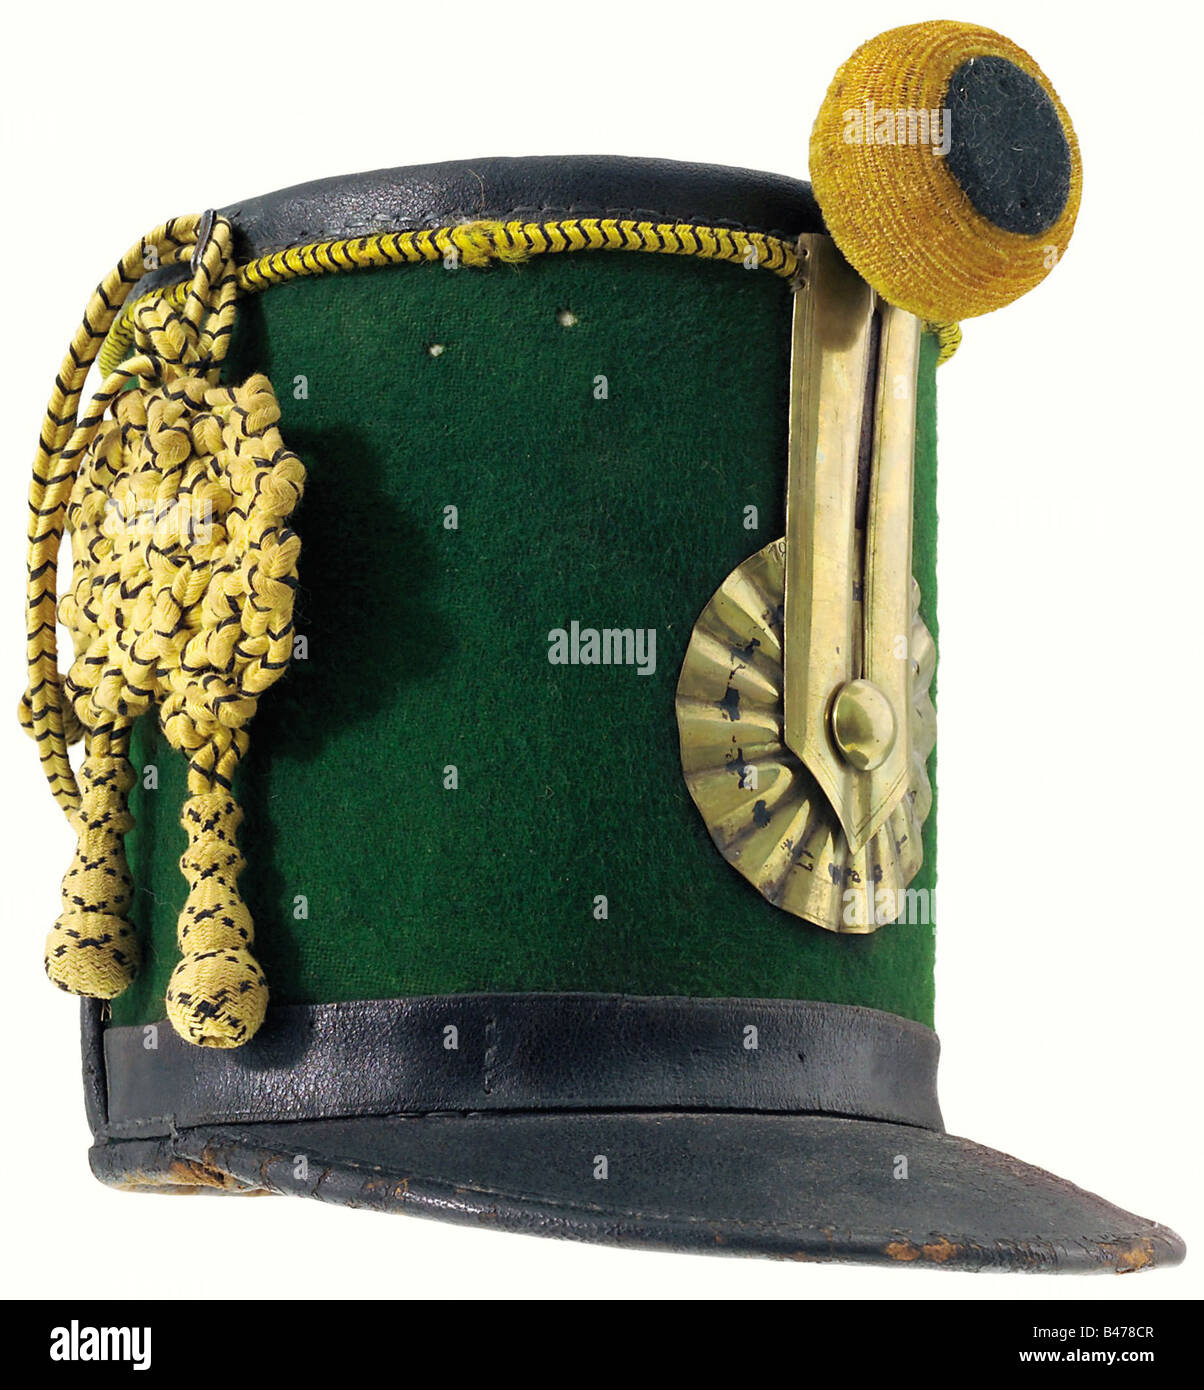 Austria: A shako of 1816 pattern for troopers, of the 10th(?) Hussar s Regiment. Cardboard body covered with green cloth, leather top, band and visor. The peak brim fixed to the body. Black interwoven yellow square lace and Vitez Kötez. Sweat leather, barracan lining, leather strap. Yellow/black field insignia, brass cockade and agraffe (marked '18'). Height of the body 21 cm. Fresh colours, three small moth holes. A rare shako in good condition. historic, historical, 19th century, uniform, uniforms, clothing, clothes, outfit, outfits, wear, object, objects, st, Stock Photo